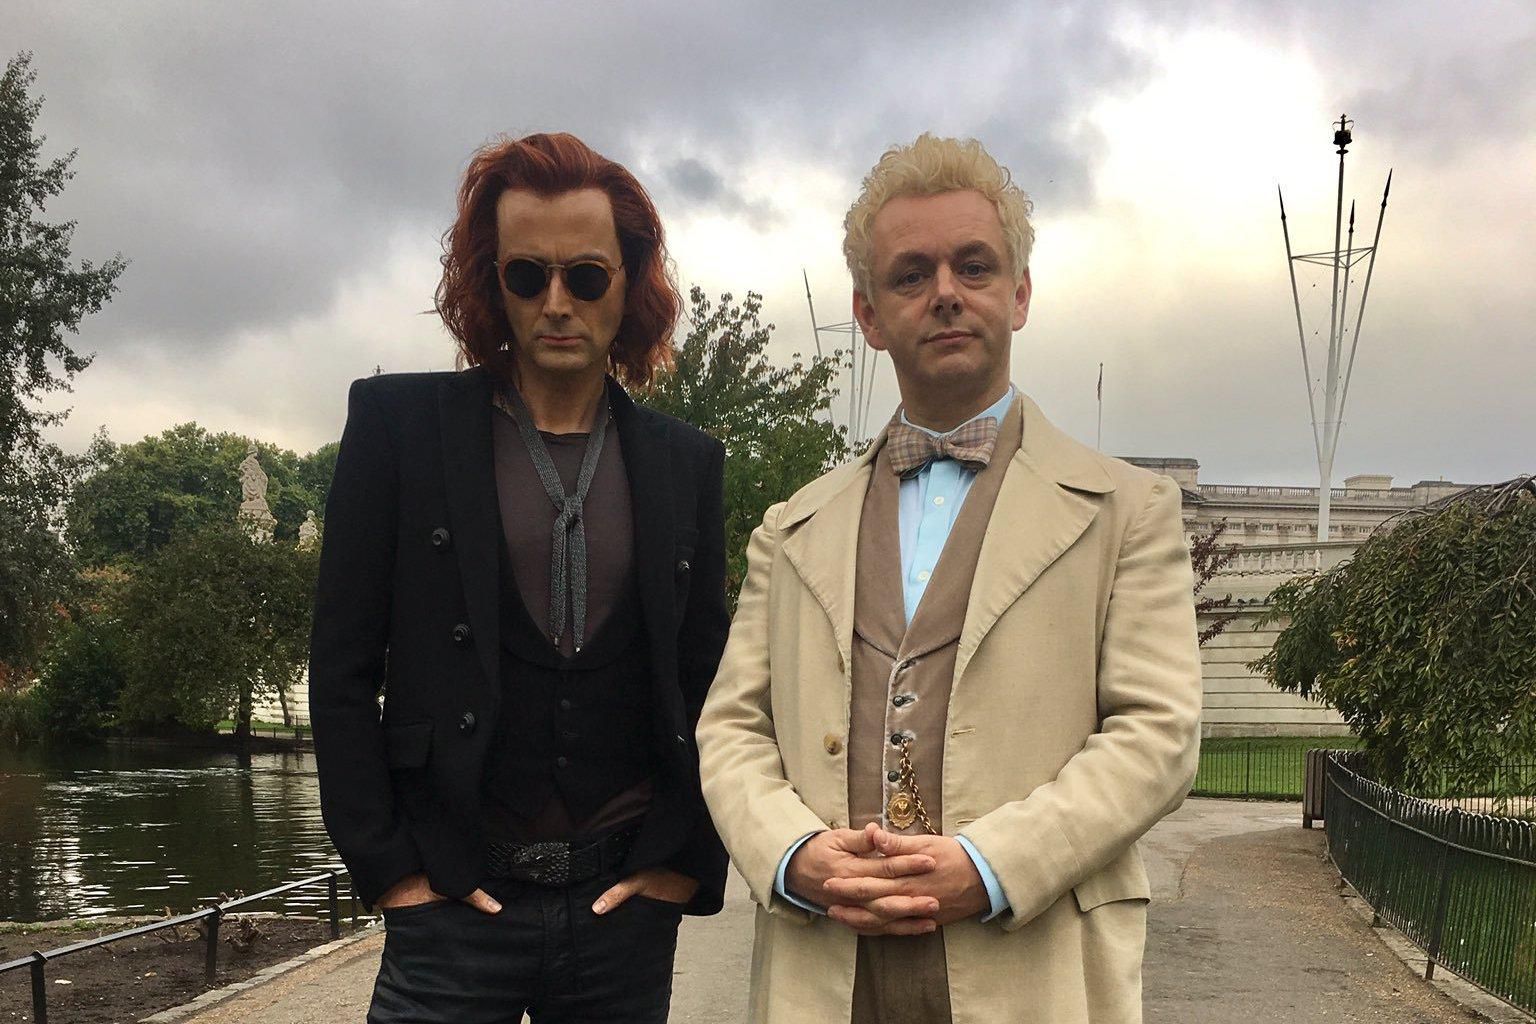 Amazon Prime Video bringing Good Omens, The Man in the High Castle, Lore and The Boys to NYCC